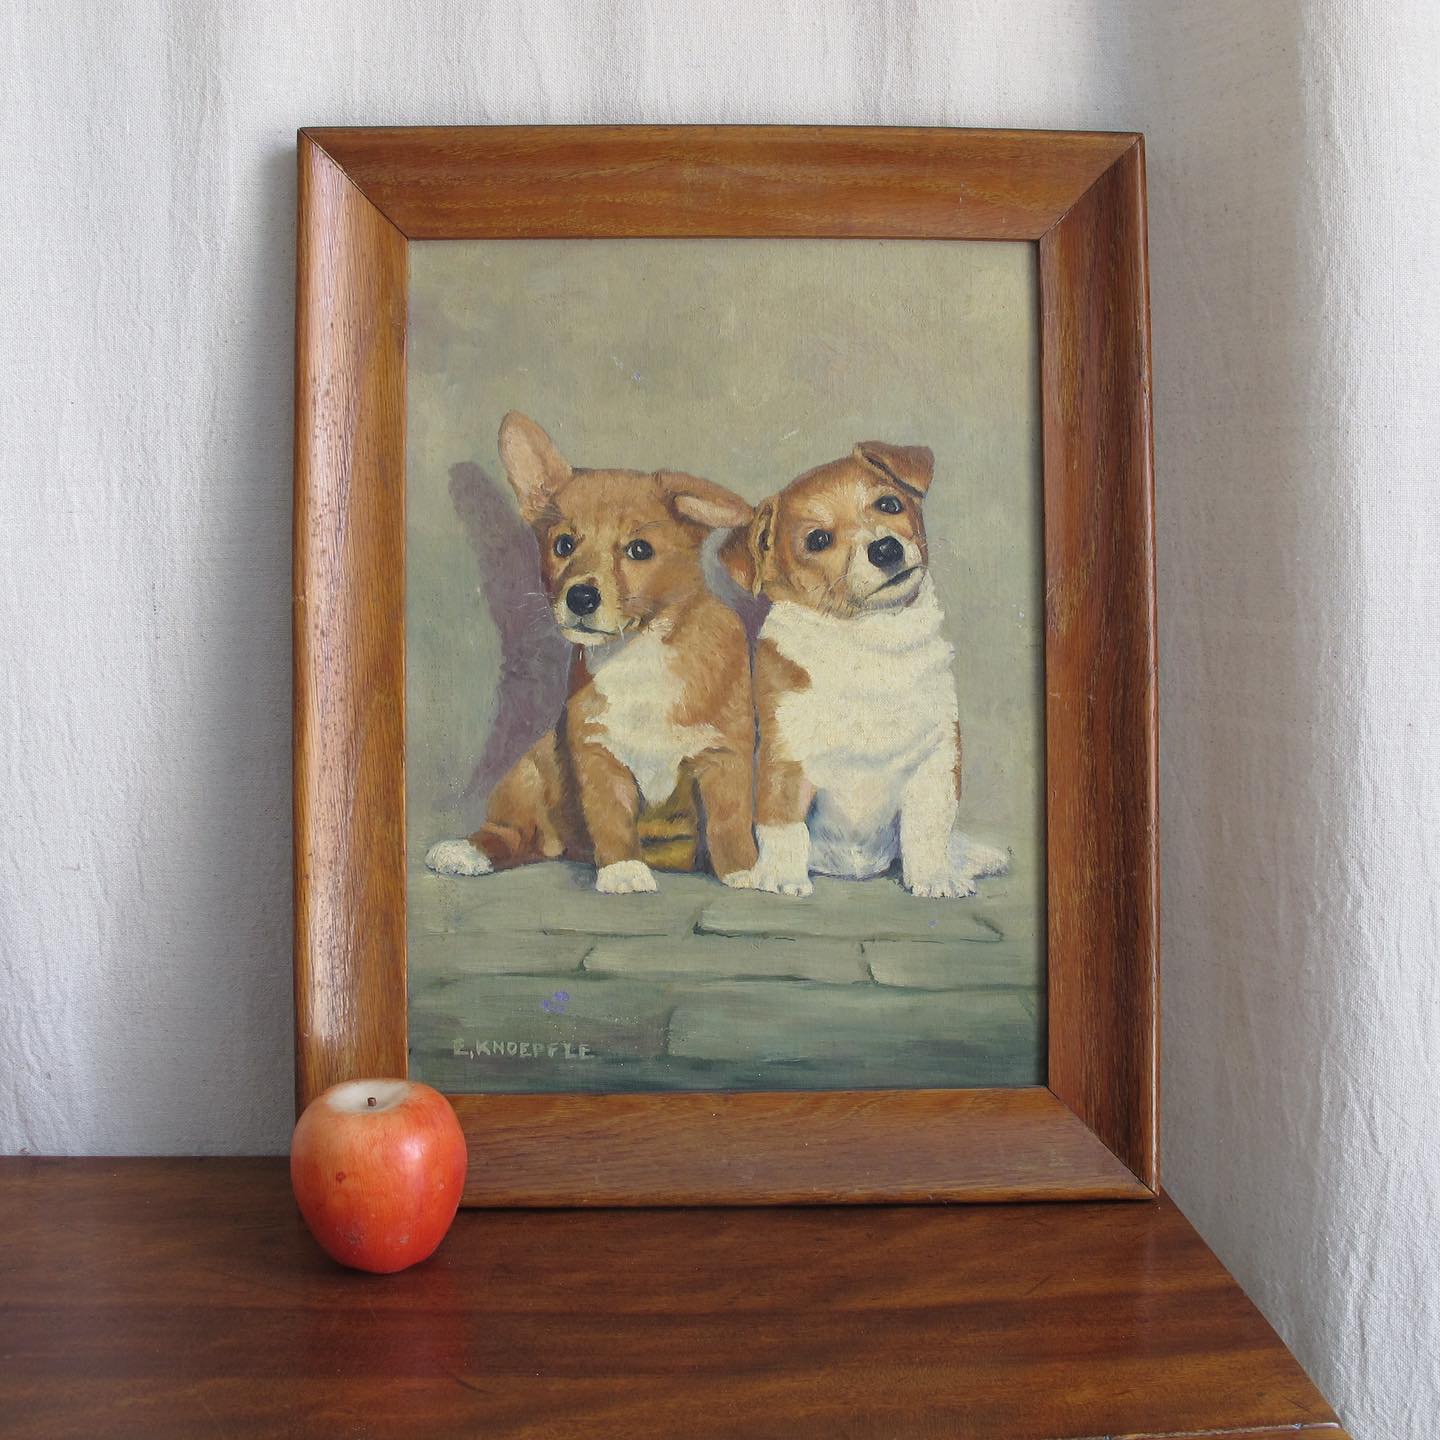 Puppy Dogs Oil on Canvas, one a corgi the other a terrier, artist signed E. KNOEPFLE, c. 1940